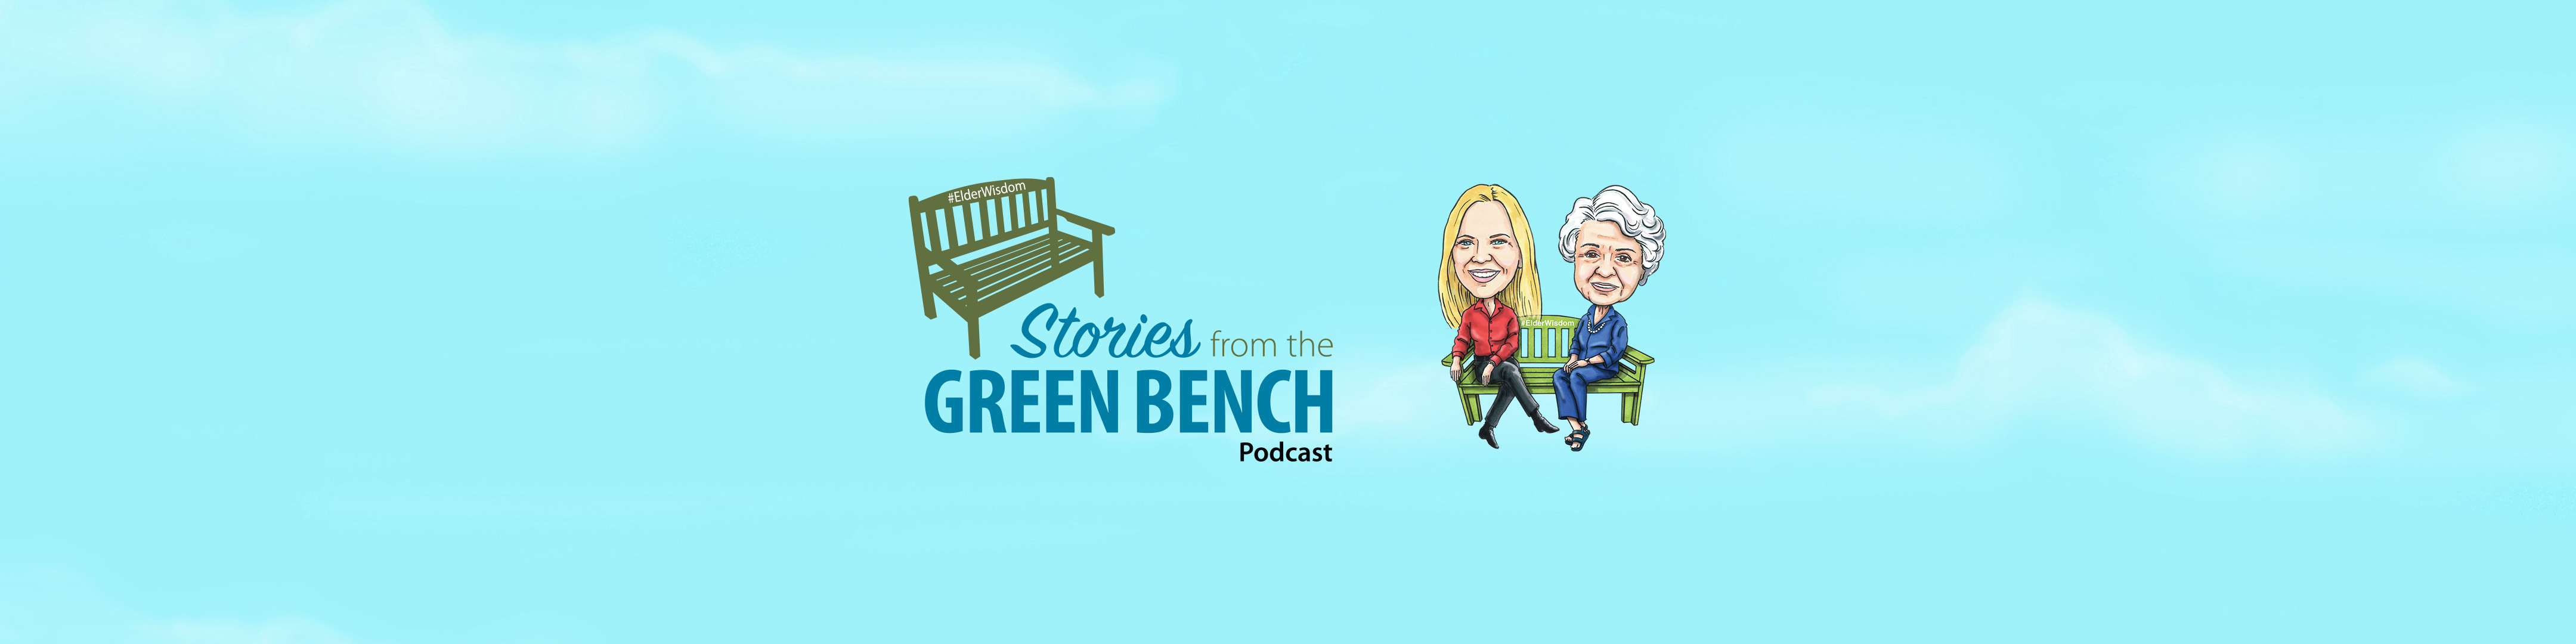 text: stories from the green bench podcast, Caricature art of Kathy Buckworth & Evelyn Brindle on the green bench